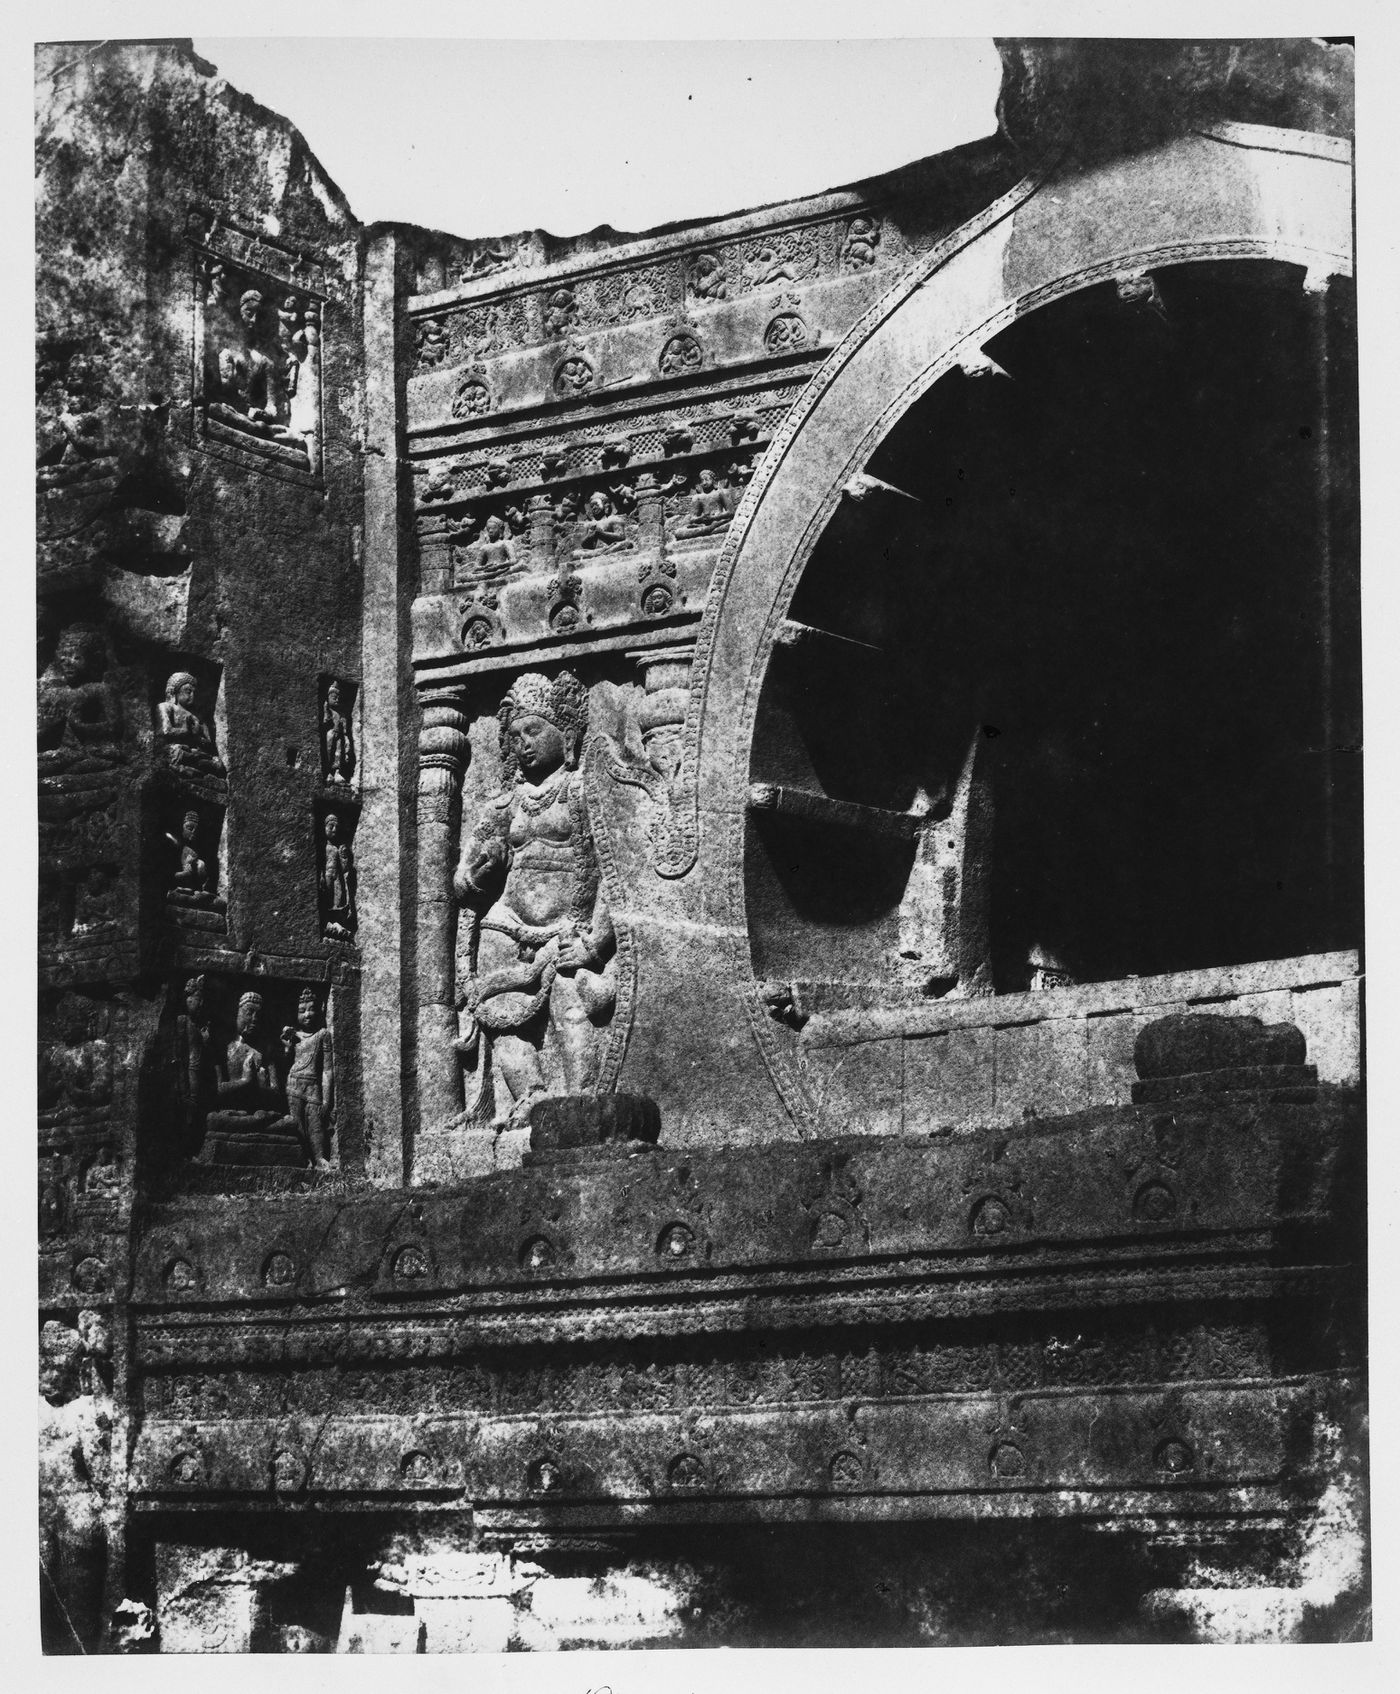 Partial view of the upper part of the entrance façade of Cave 19 showing the arch and bas-reliefs, Ajanta, India